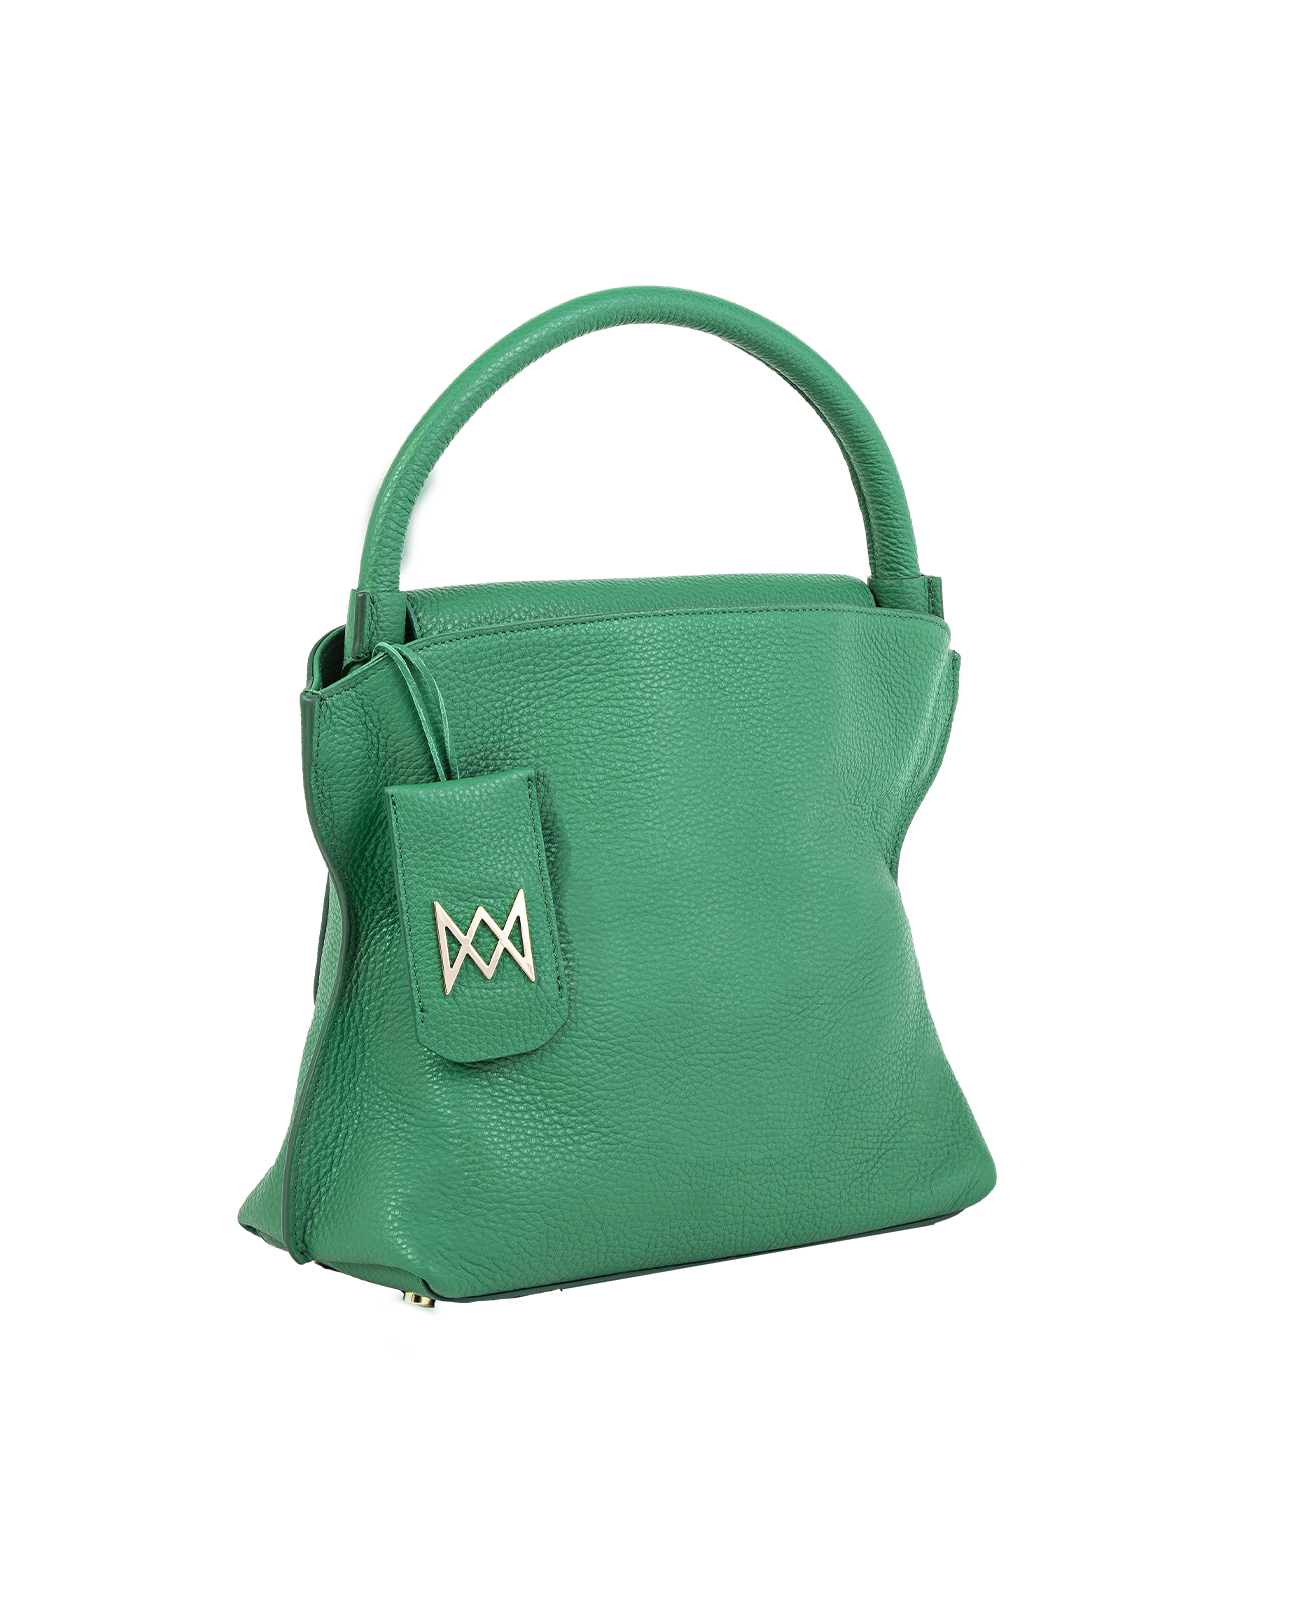 Cross-body bag in Italian full-grain leather, semi-aniline calf Italian leather with detachable shoulder strap.Three compartments, zip pocket in the back compartment. Magnetic flap closure with logo. Color: Green. Size:Large